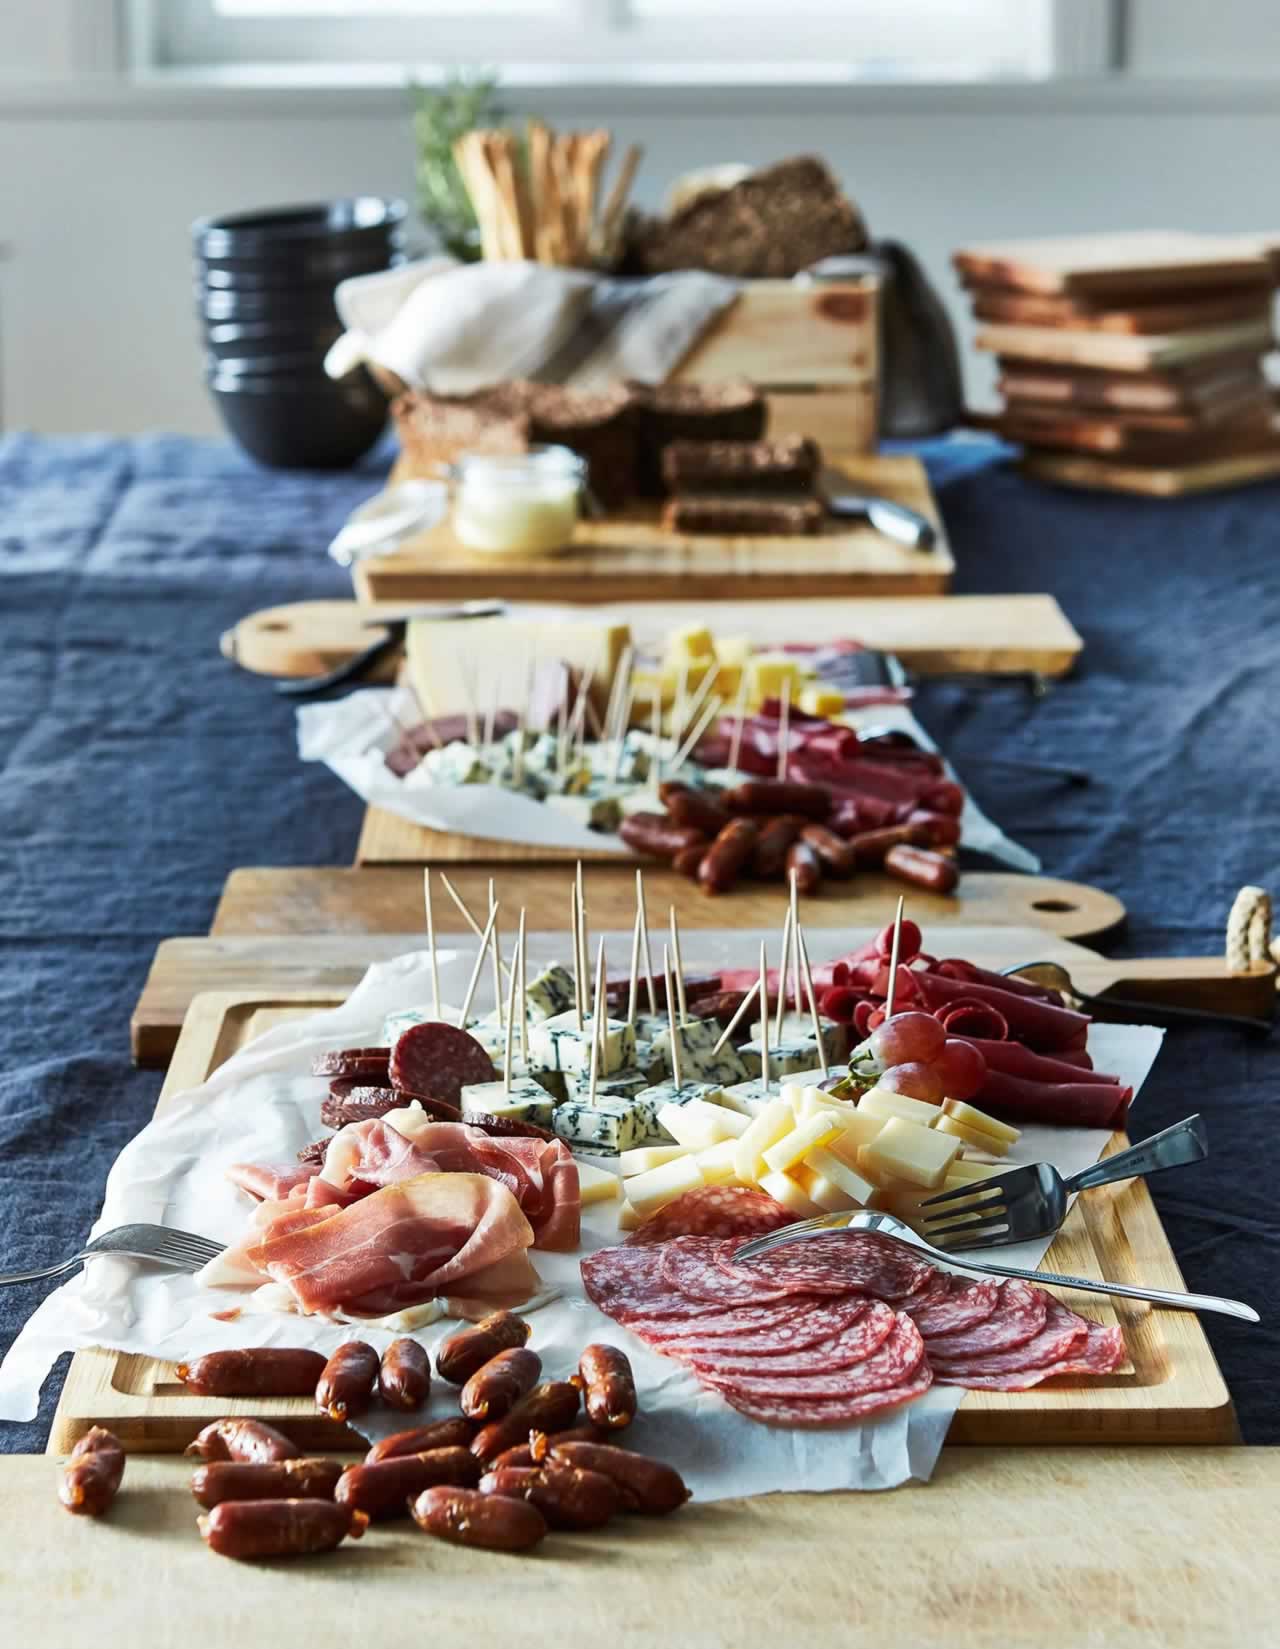 IKEA Ideas - A no-cook dinner party